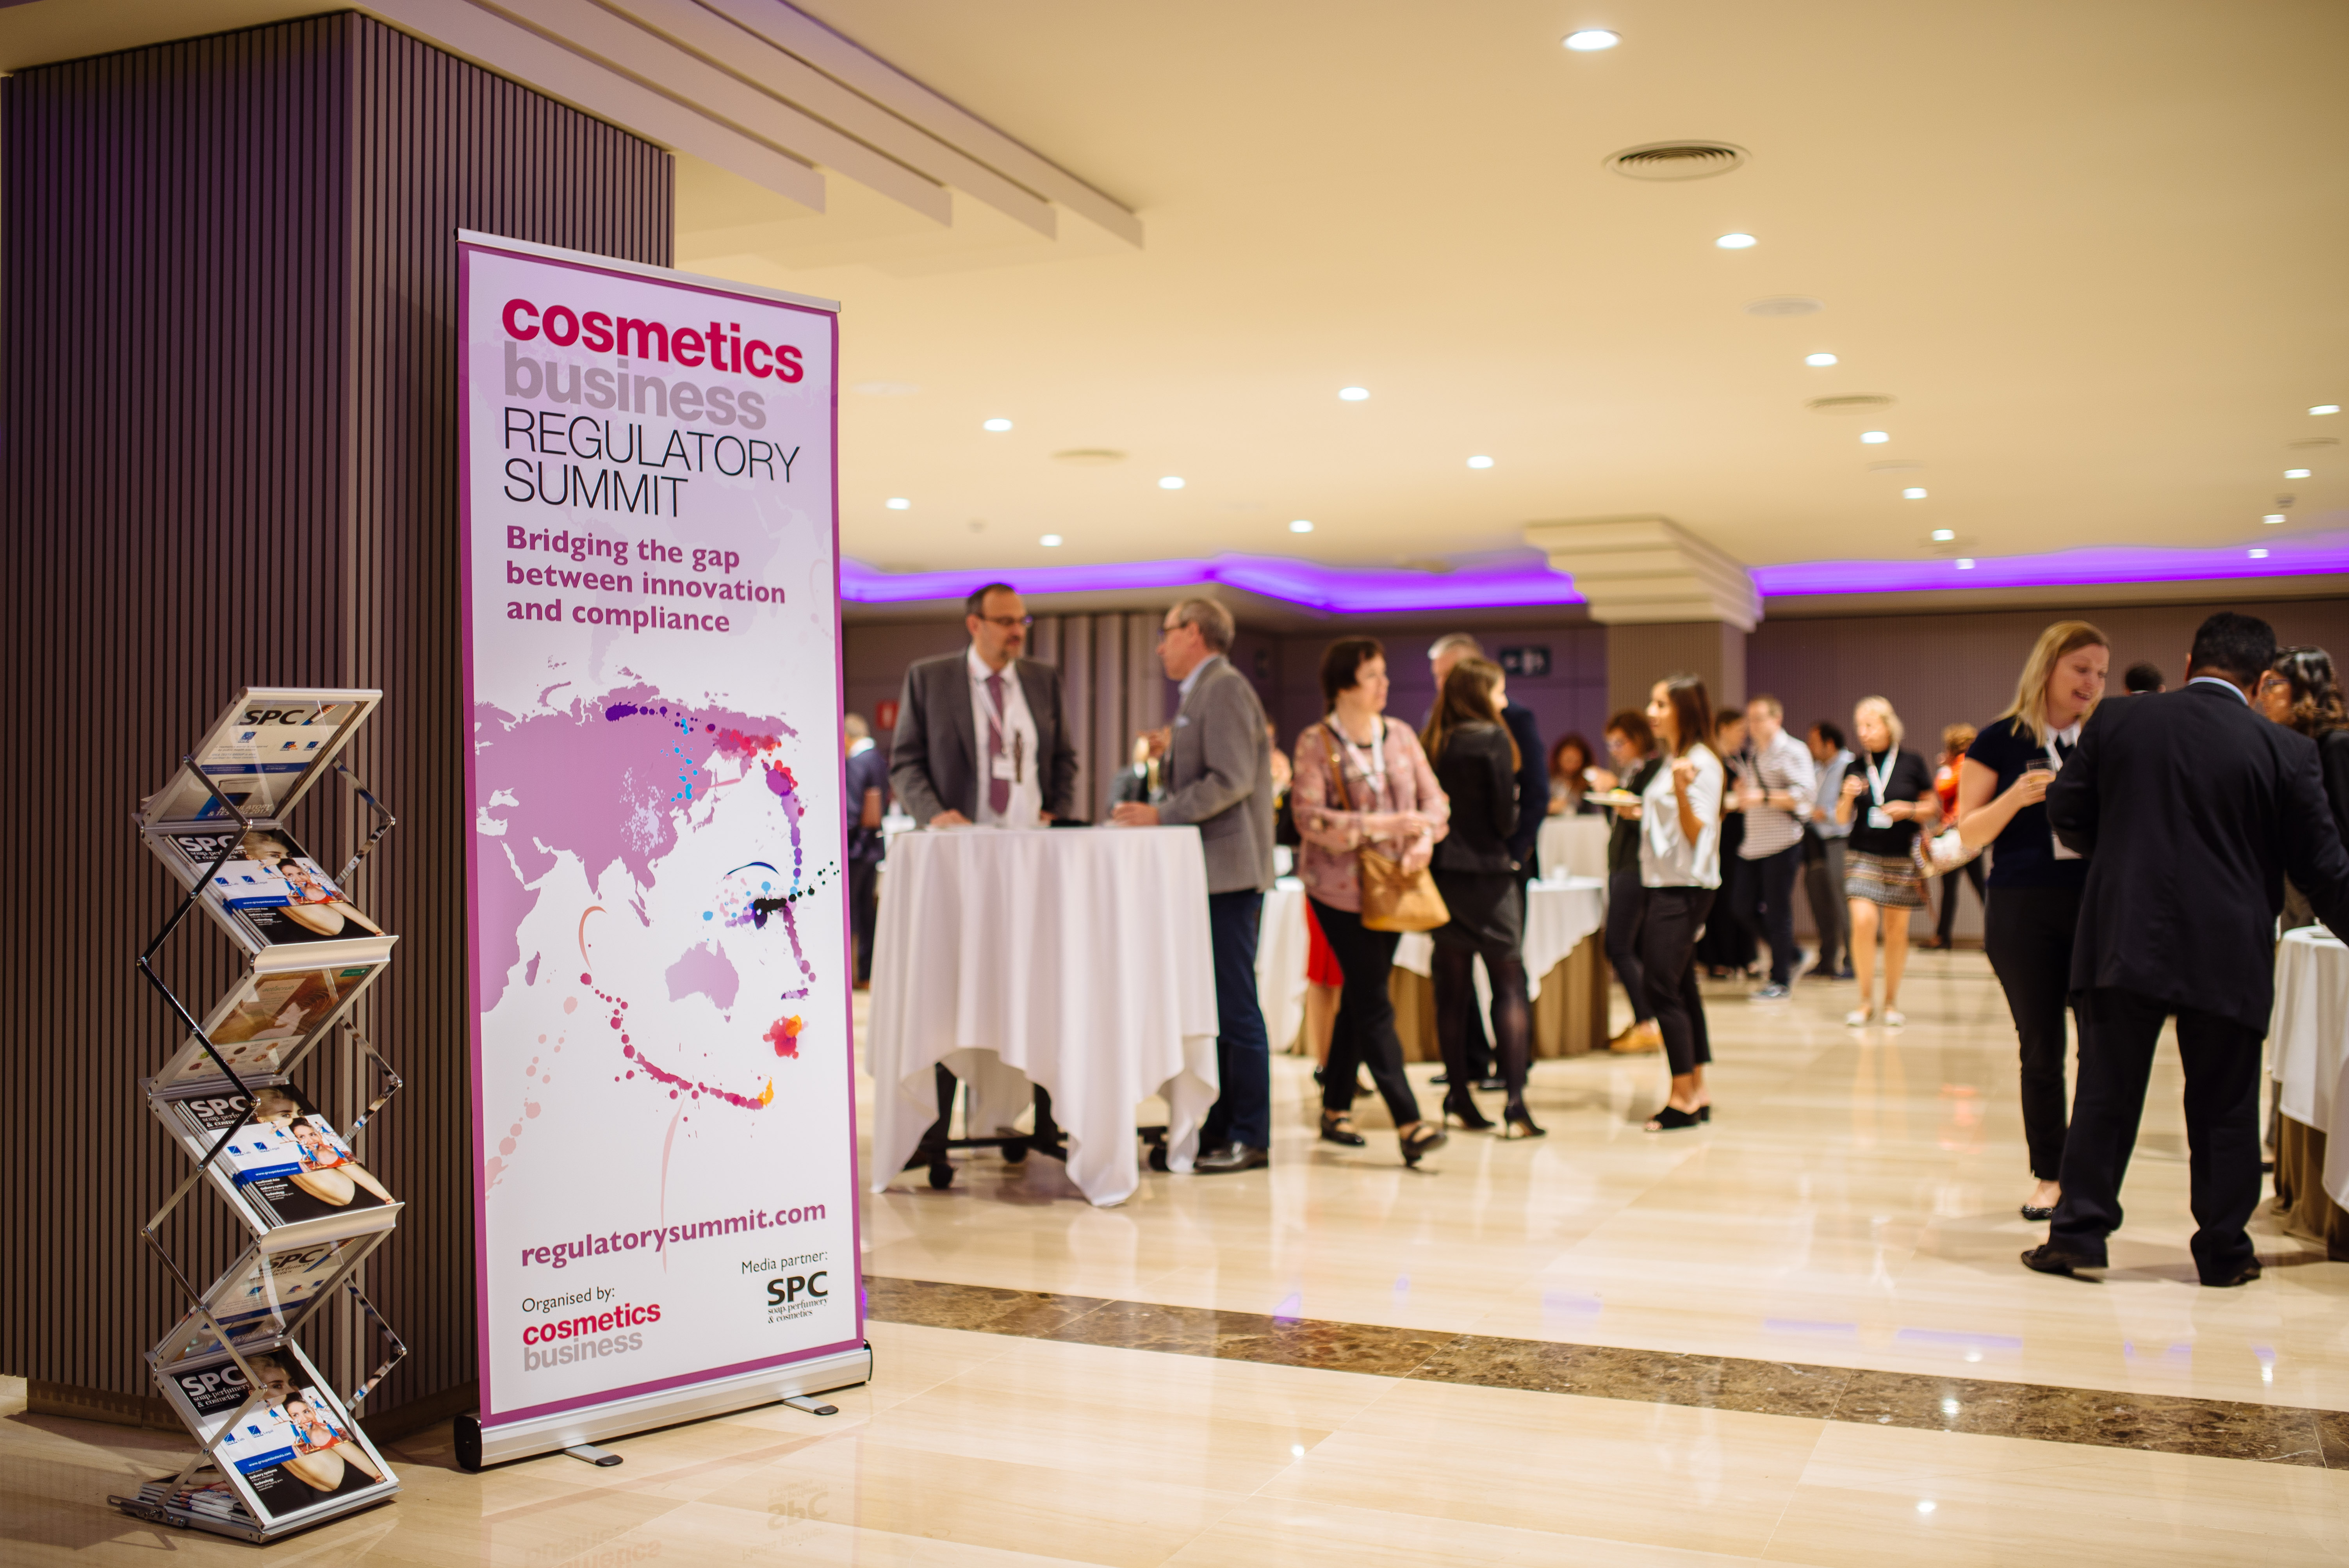 Big name sponsors revealed for the Cosmetics Business Regulatory Summit 2018